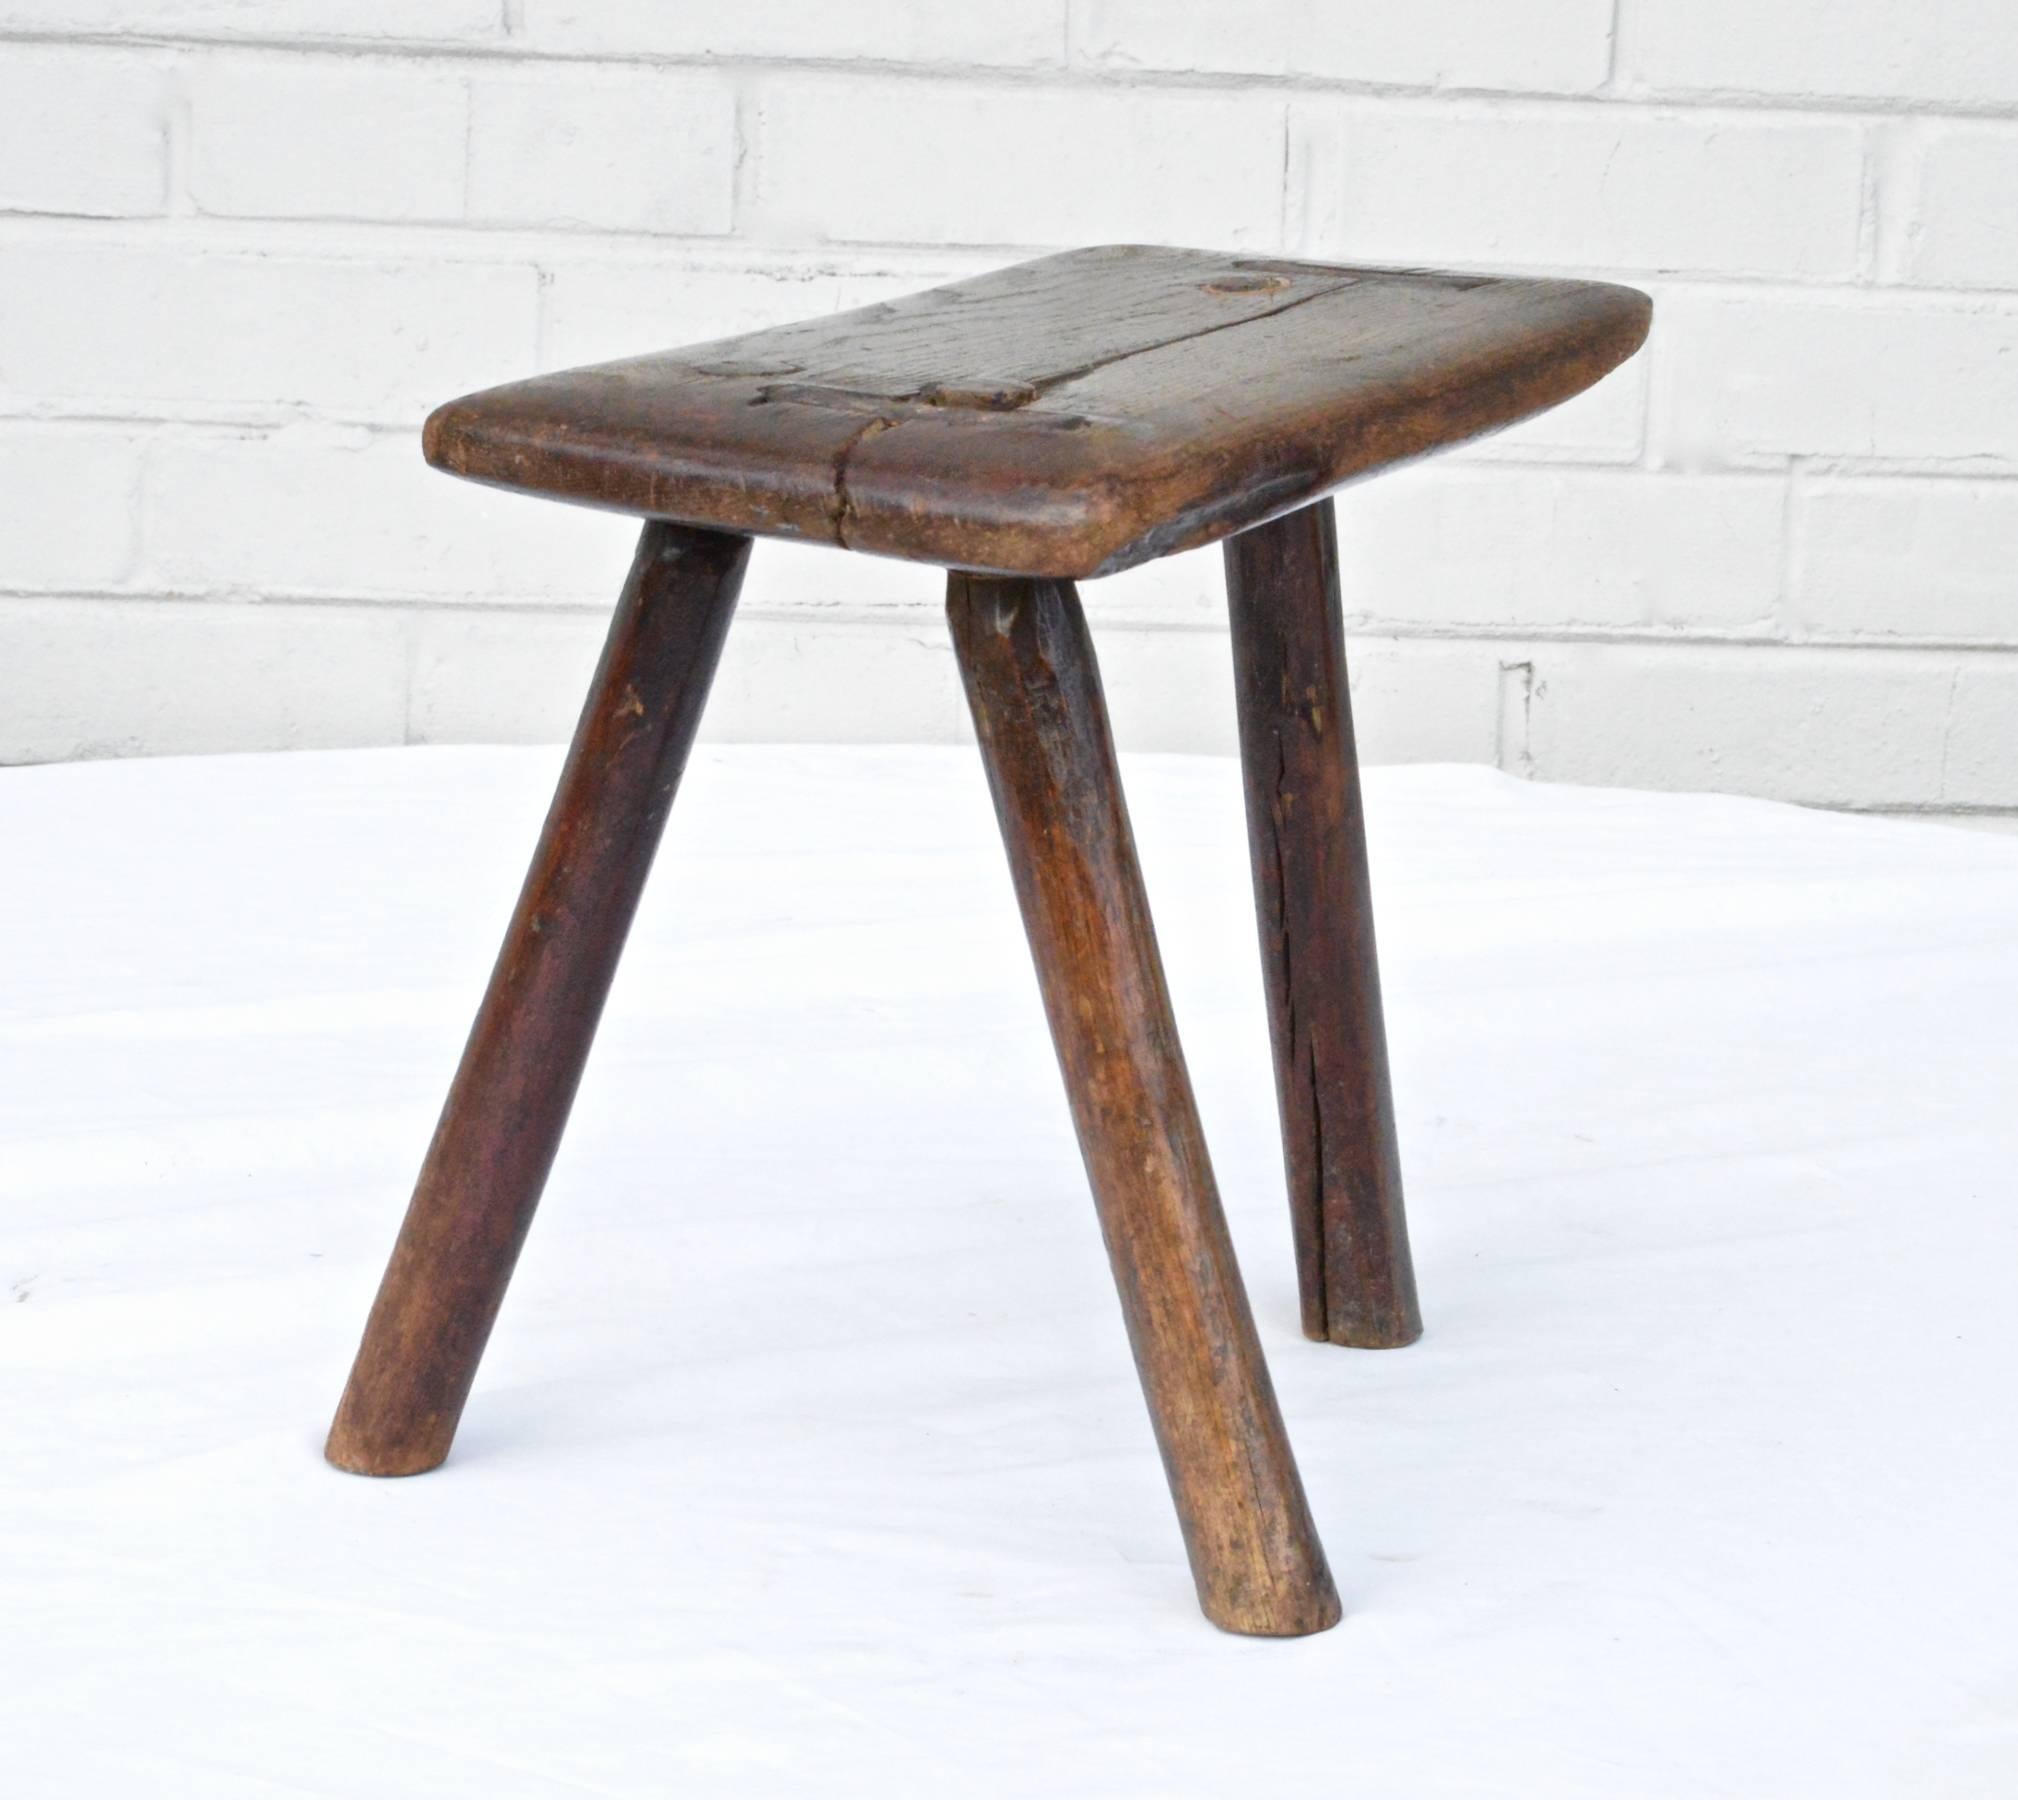 English Rustic Footstool or Plant Stand